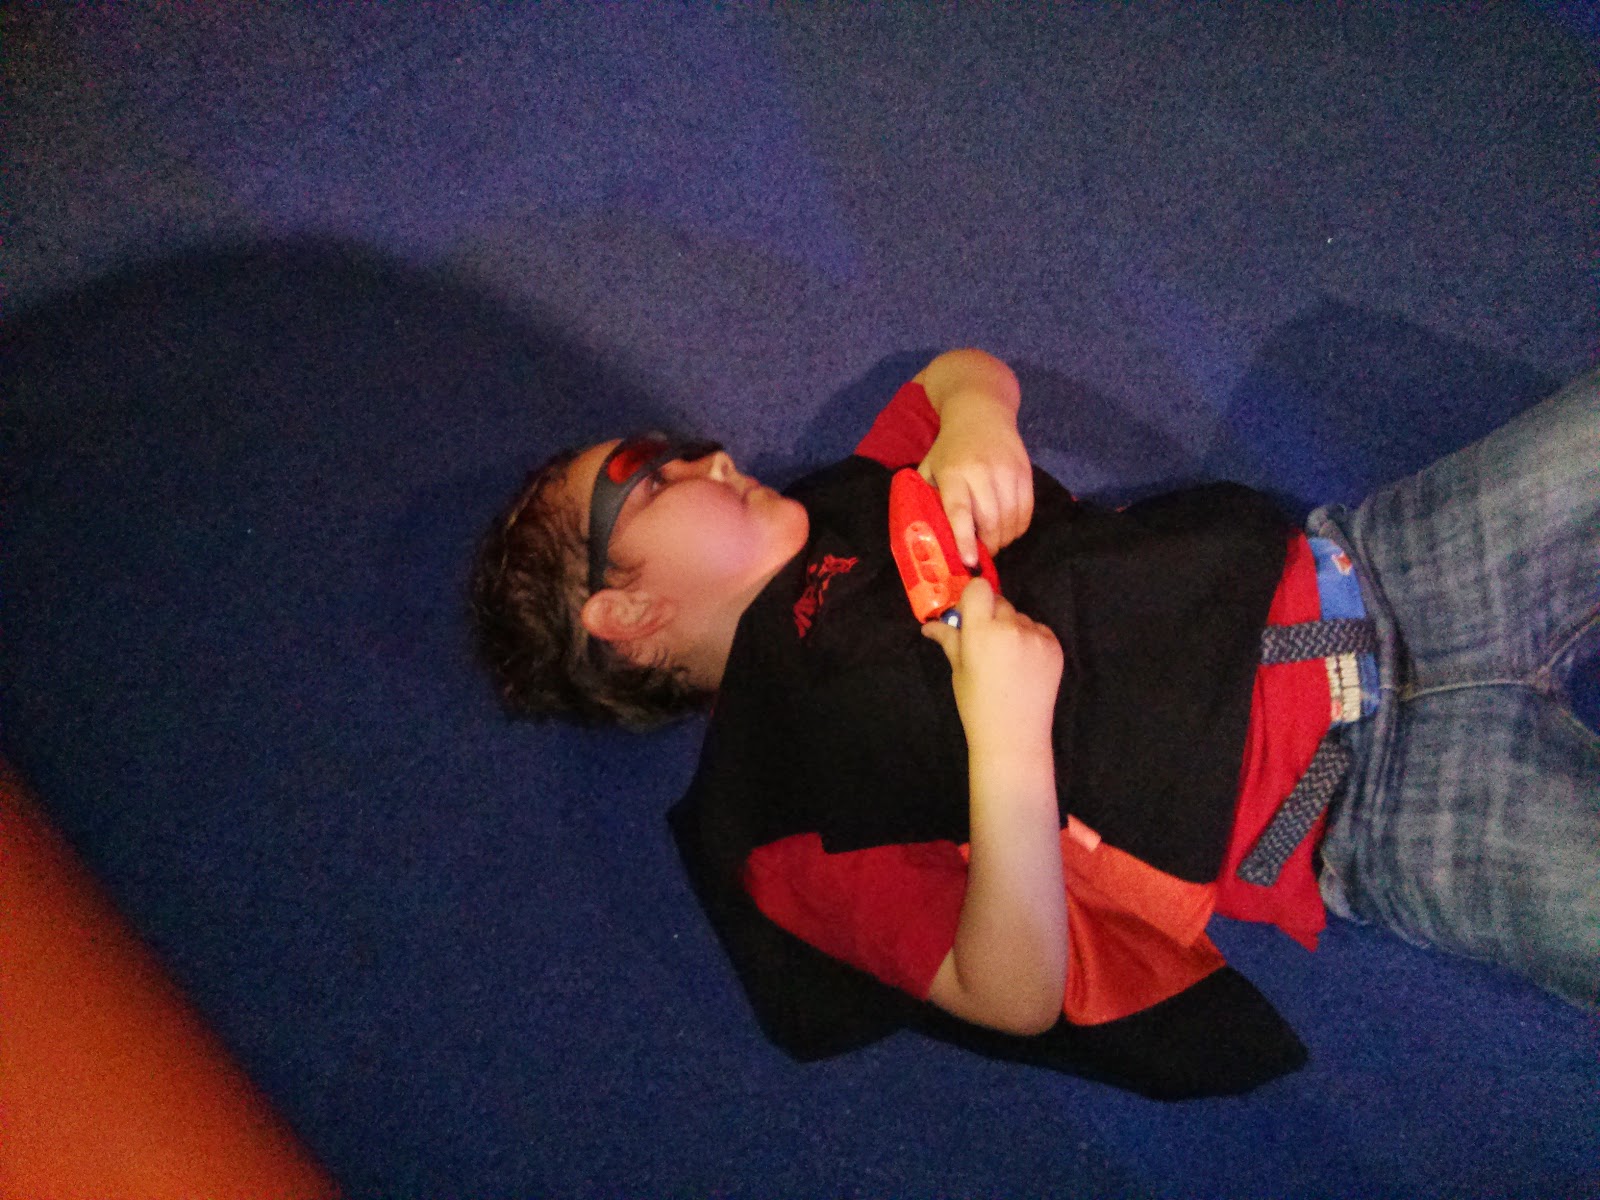 Big Boy hiding out on the floor at the Nerf Party Gullivers Land Milton Keynes